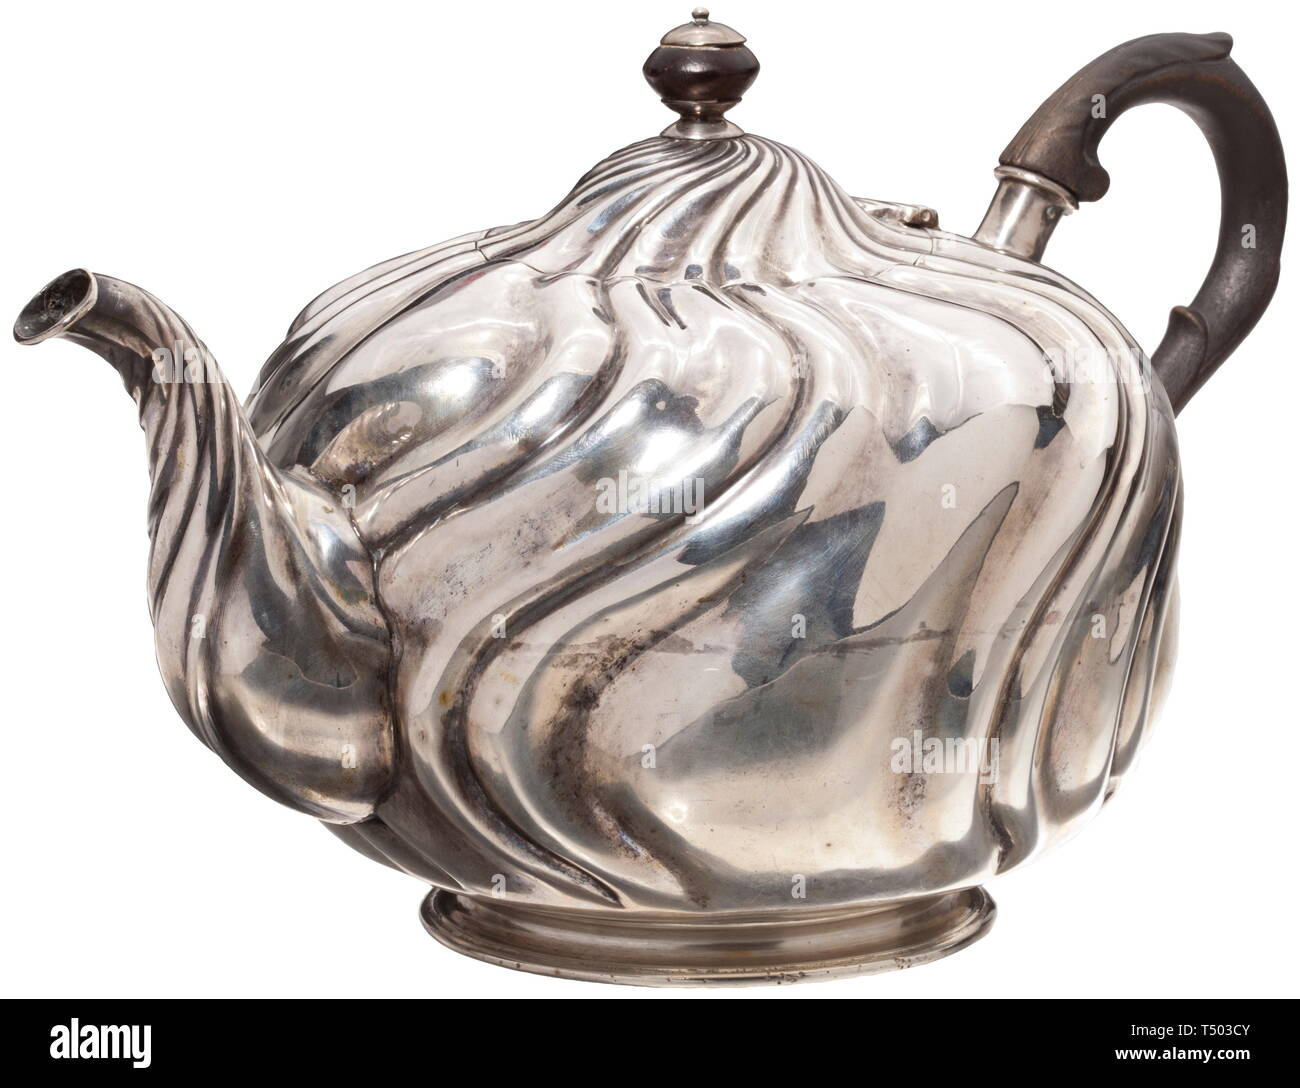 A silver teapot Augsburg, circa 1785. Round, richly gadrooned body (slightly dented). Hinged lid on a small, flared foot. Wooden knob, original wooden handle. On the bottom the city coat of arms of Augsburg with year letter 'C' (1785 - 87), master's mark 'SC' and assayer's mark. Height 16.5 cm, weight 662 g. historic, historical, handicrafts, handcraft, craft, object, objects, stills, clipping, clippings, cut out, cut-out, cut-outs, 18th century, Additional-Rights-Clearance-Info-Not-Available Stock Photo